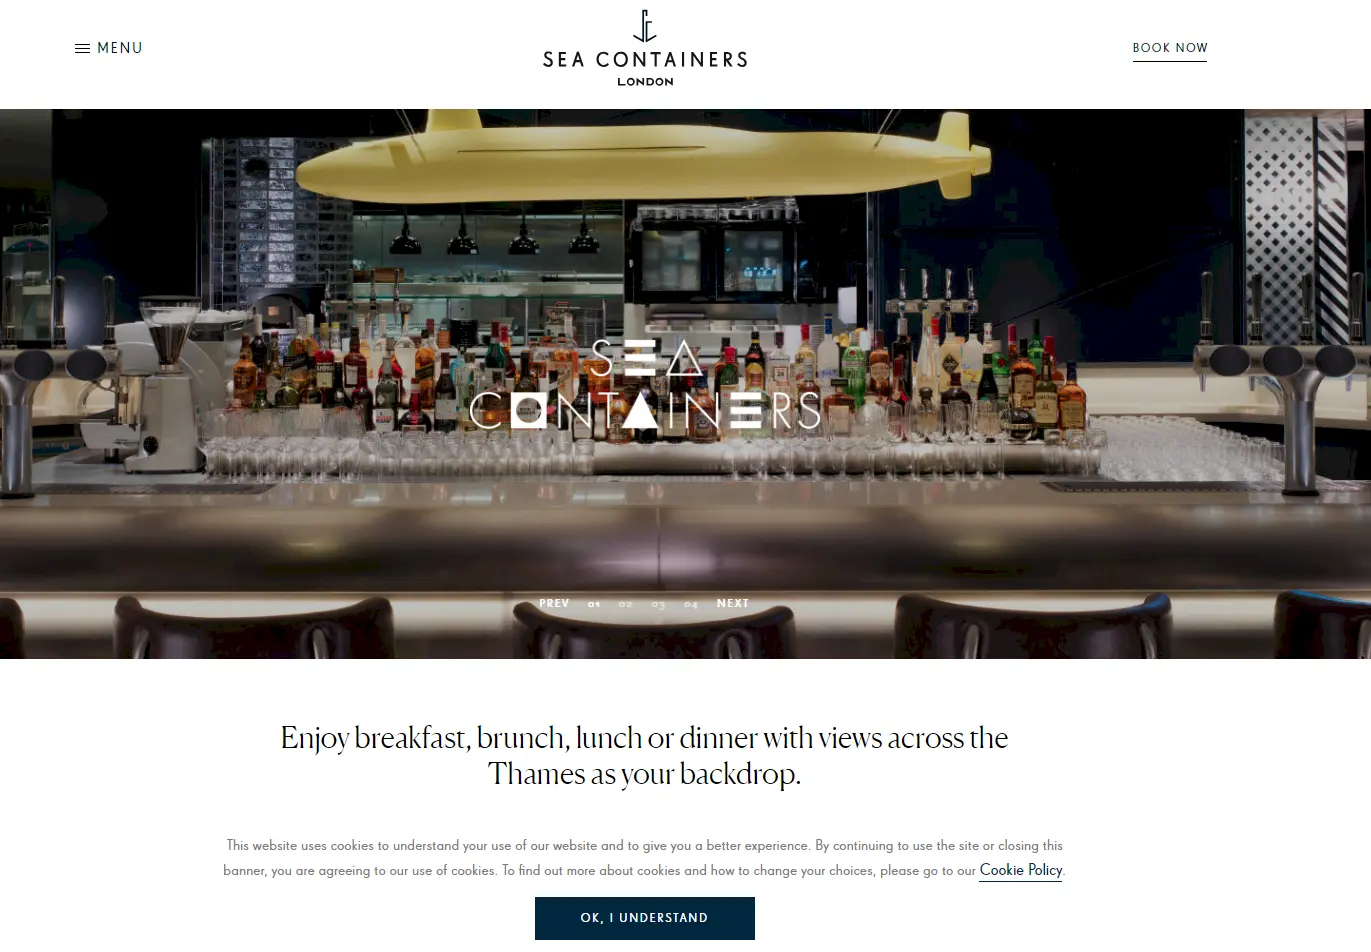 Screenshot of Sea Containers London's website